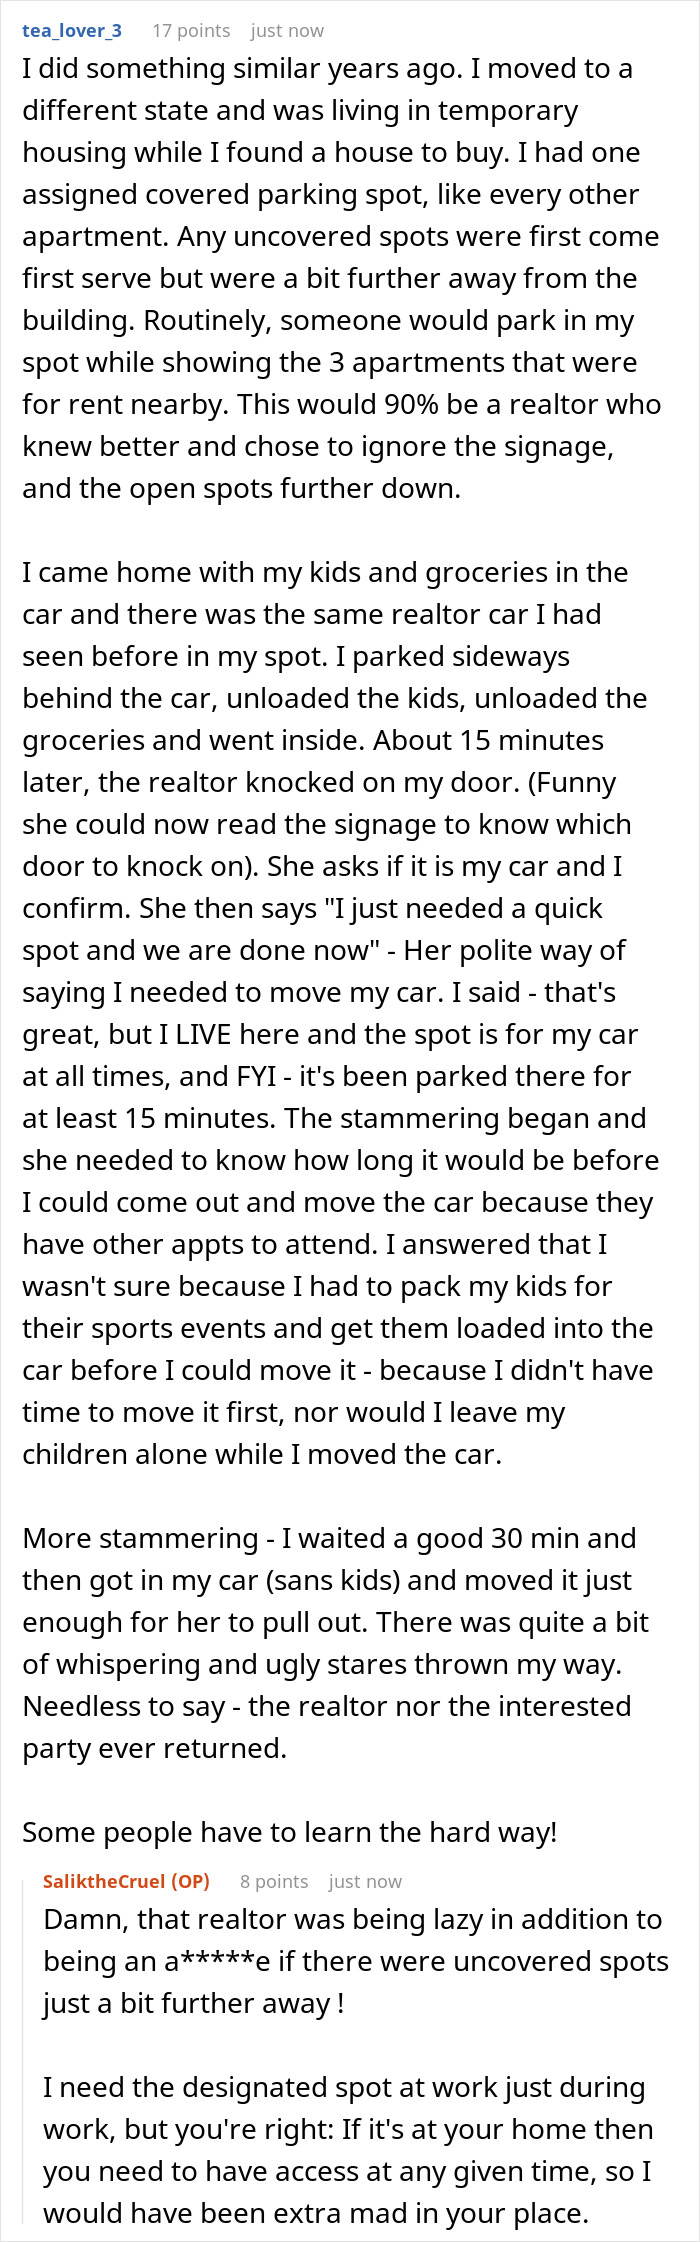 This Woman’s Idea Of Stealing Someone’s Parking Spot Backfires As The Owner Just Blocks Her Car, Making Her Wait For Almost 2 Hours